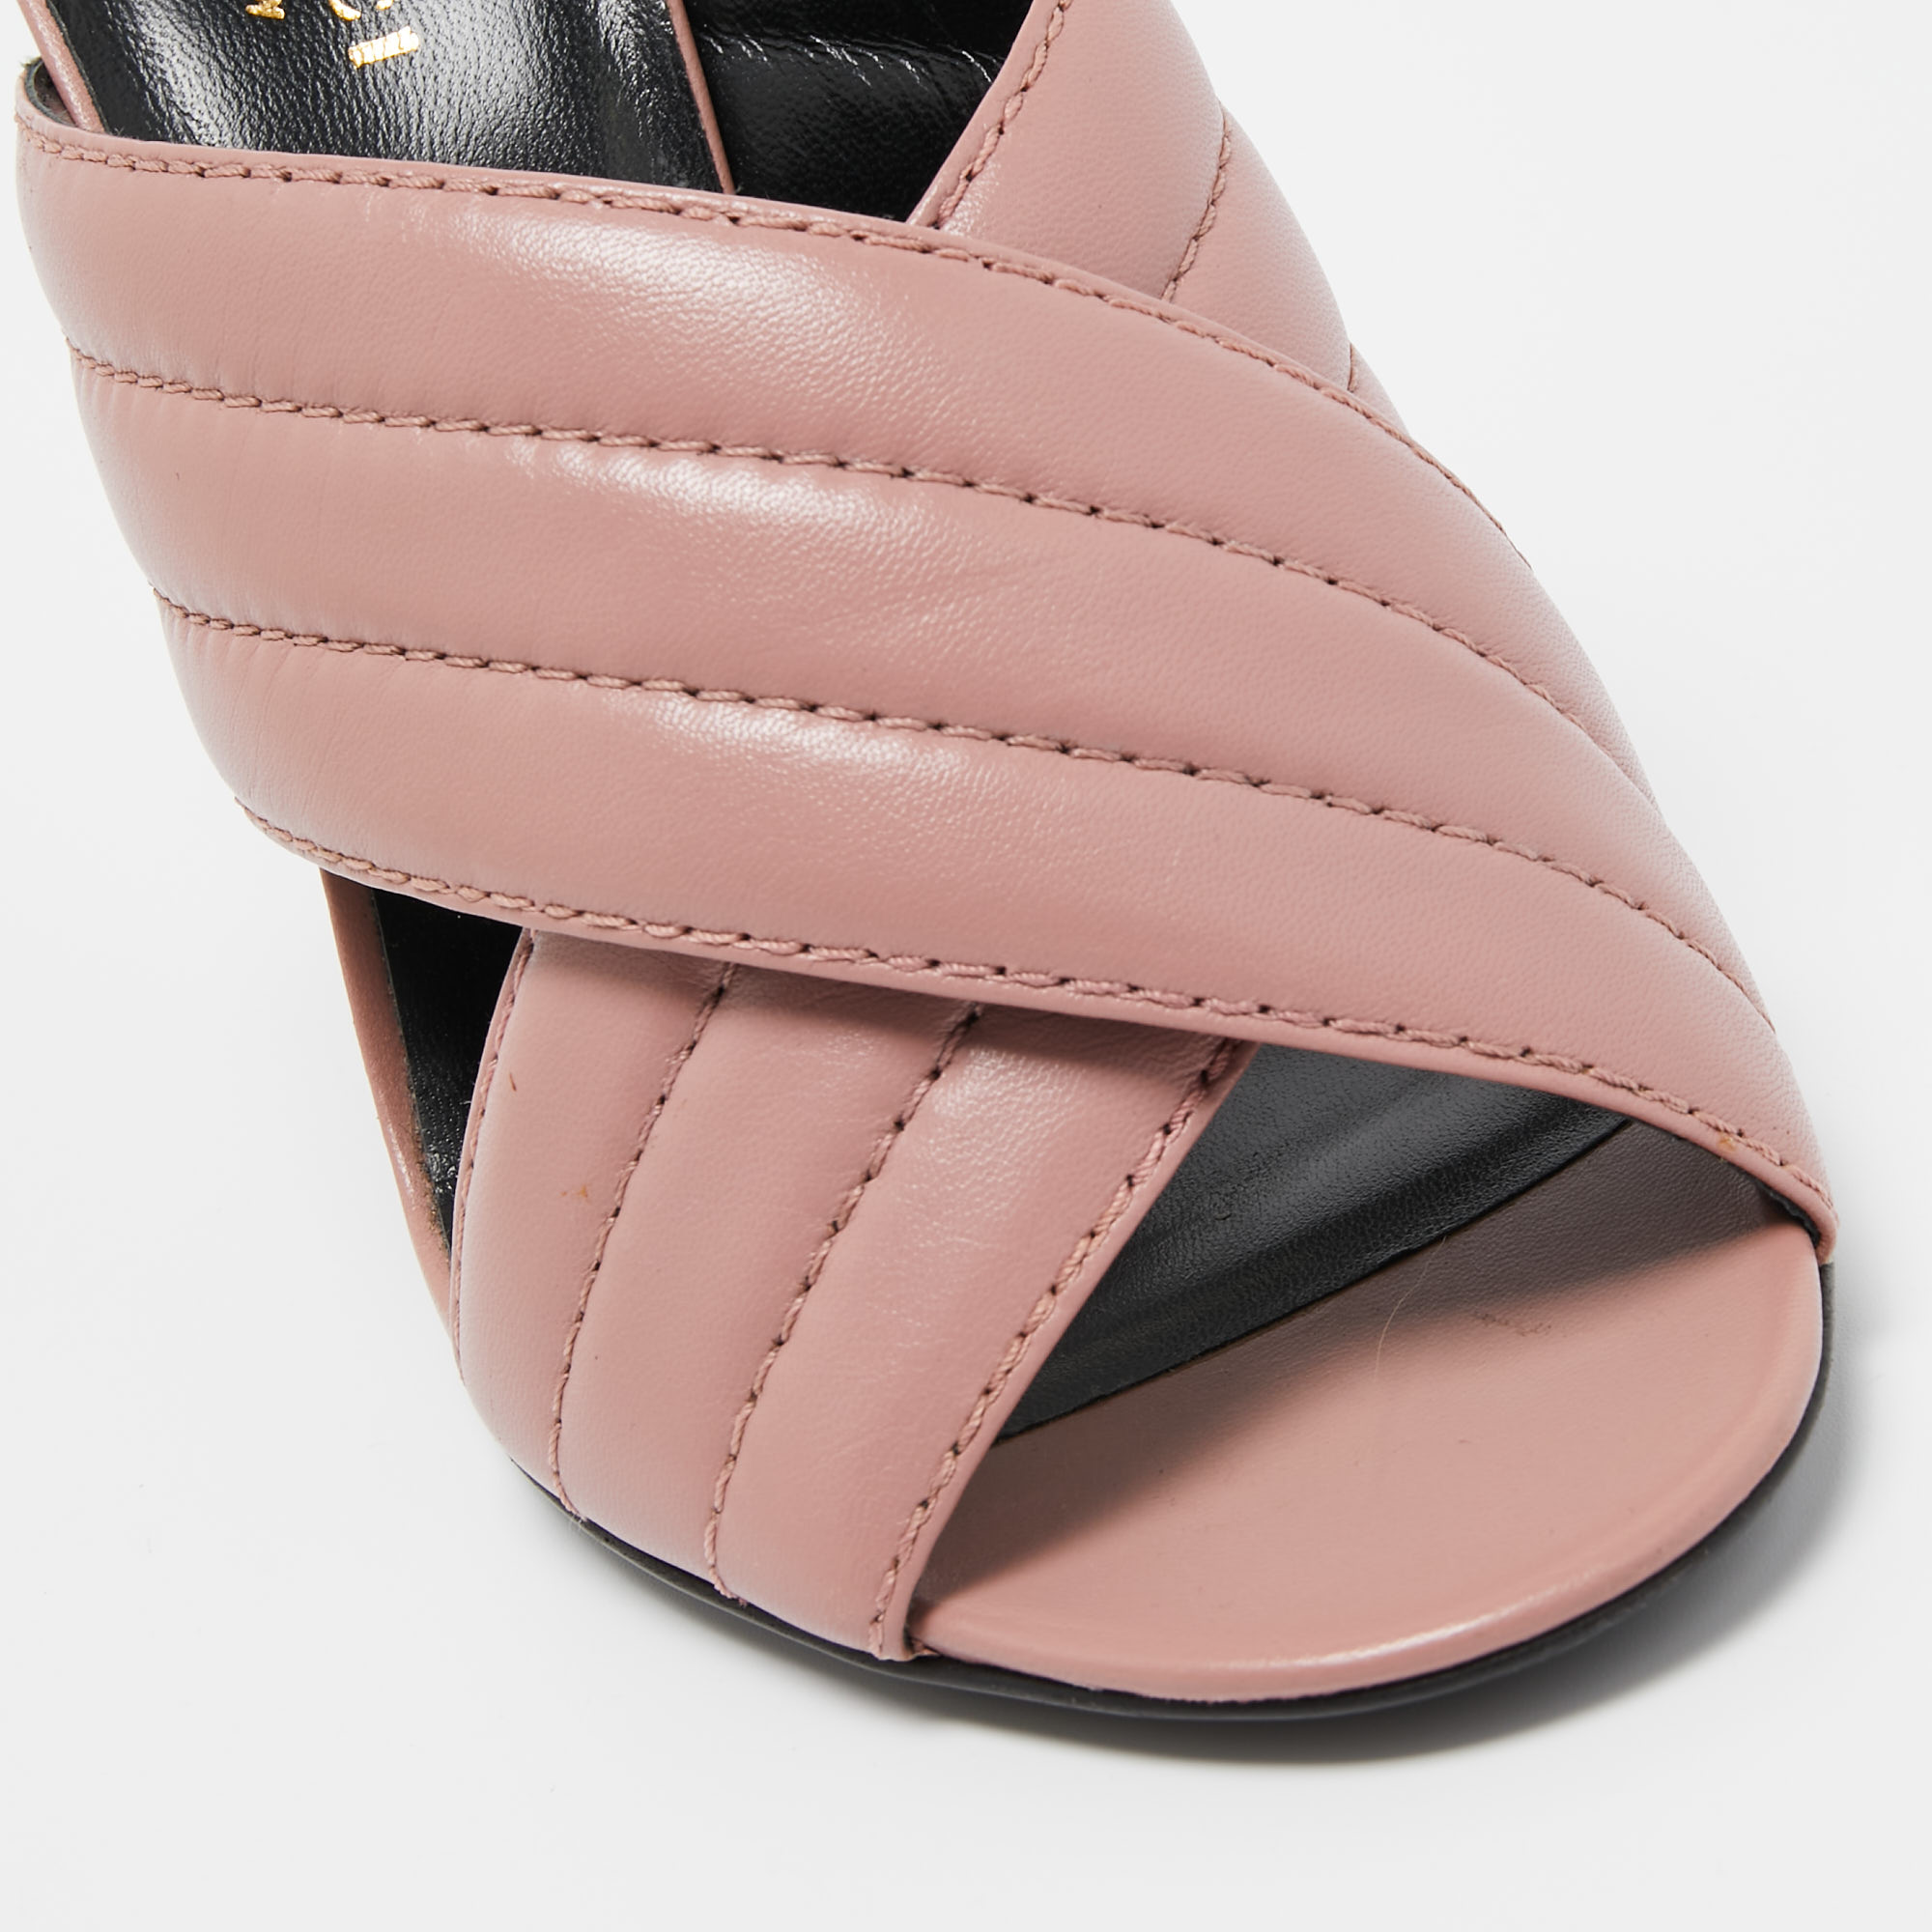 Gucci Pink Quilted Leather Webby Slide Sandals Size 38.5